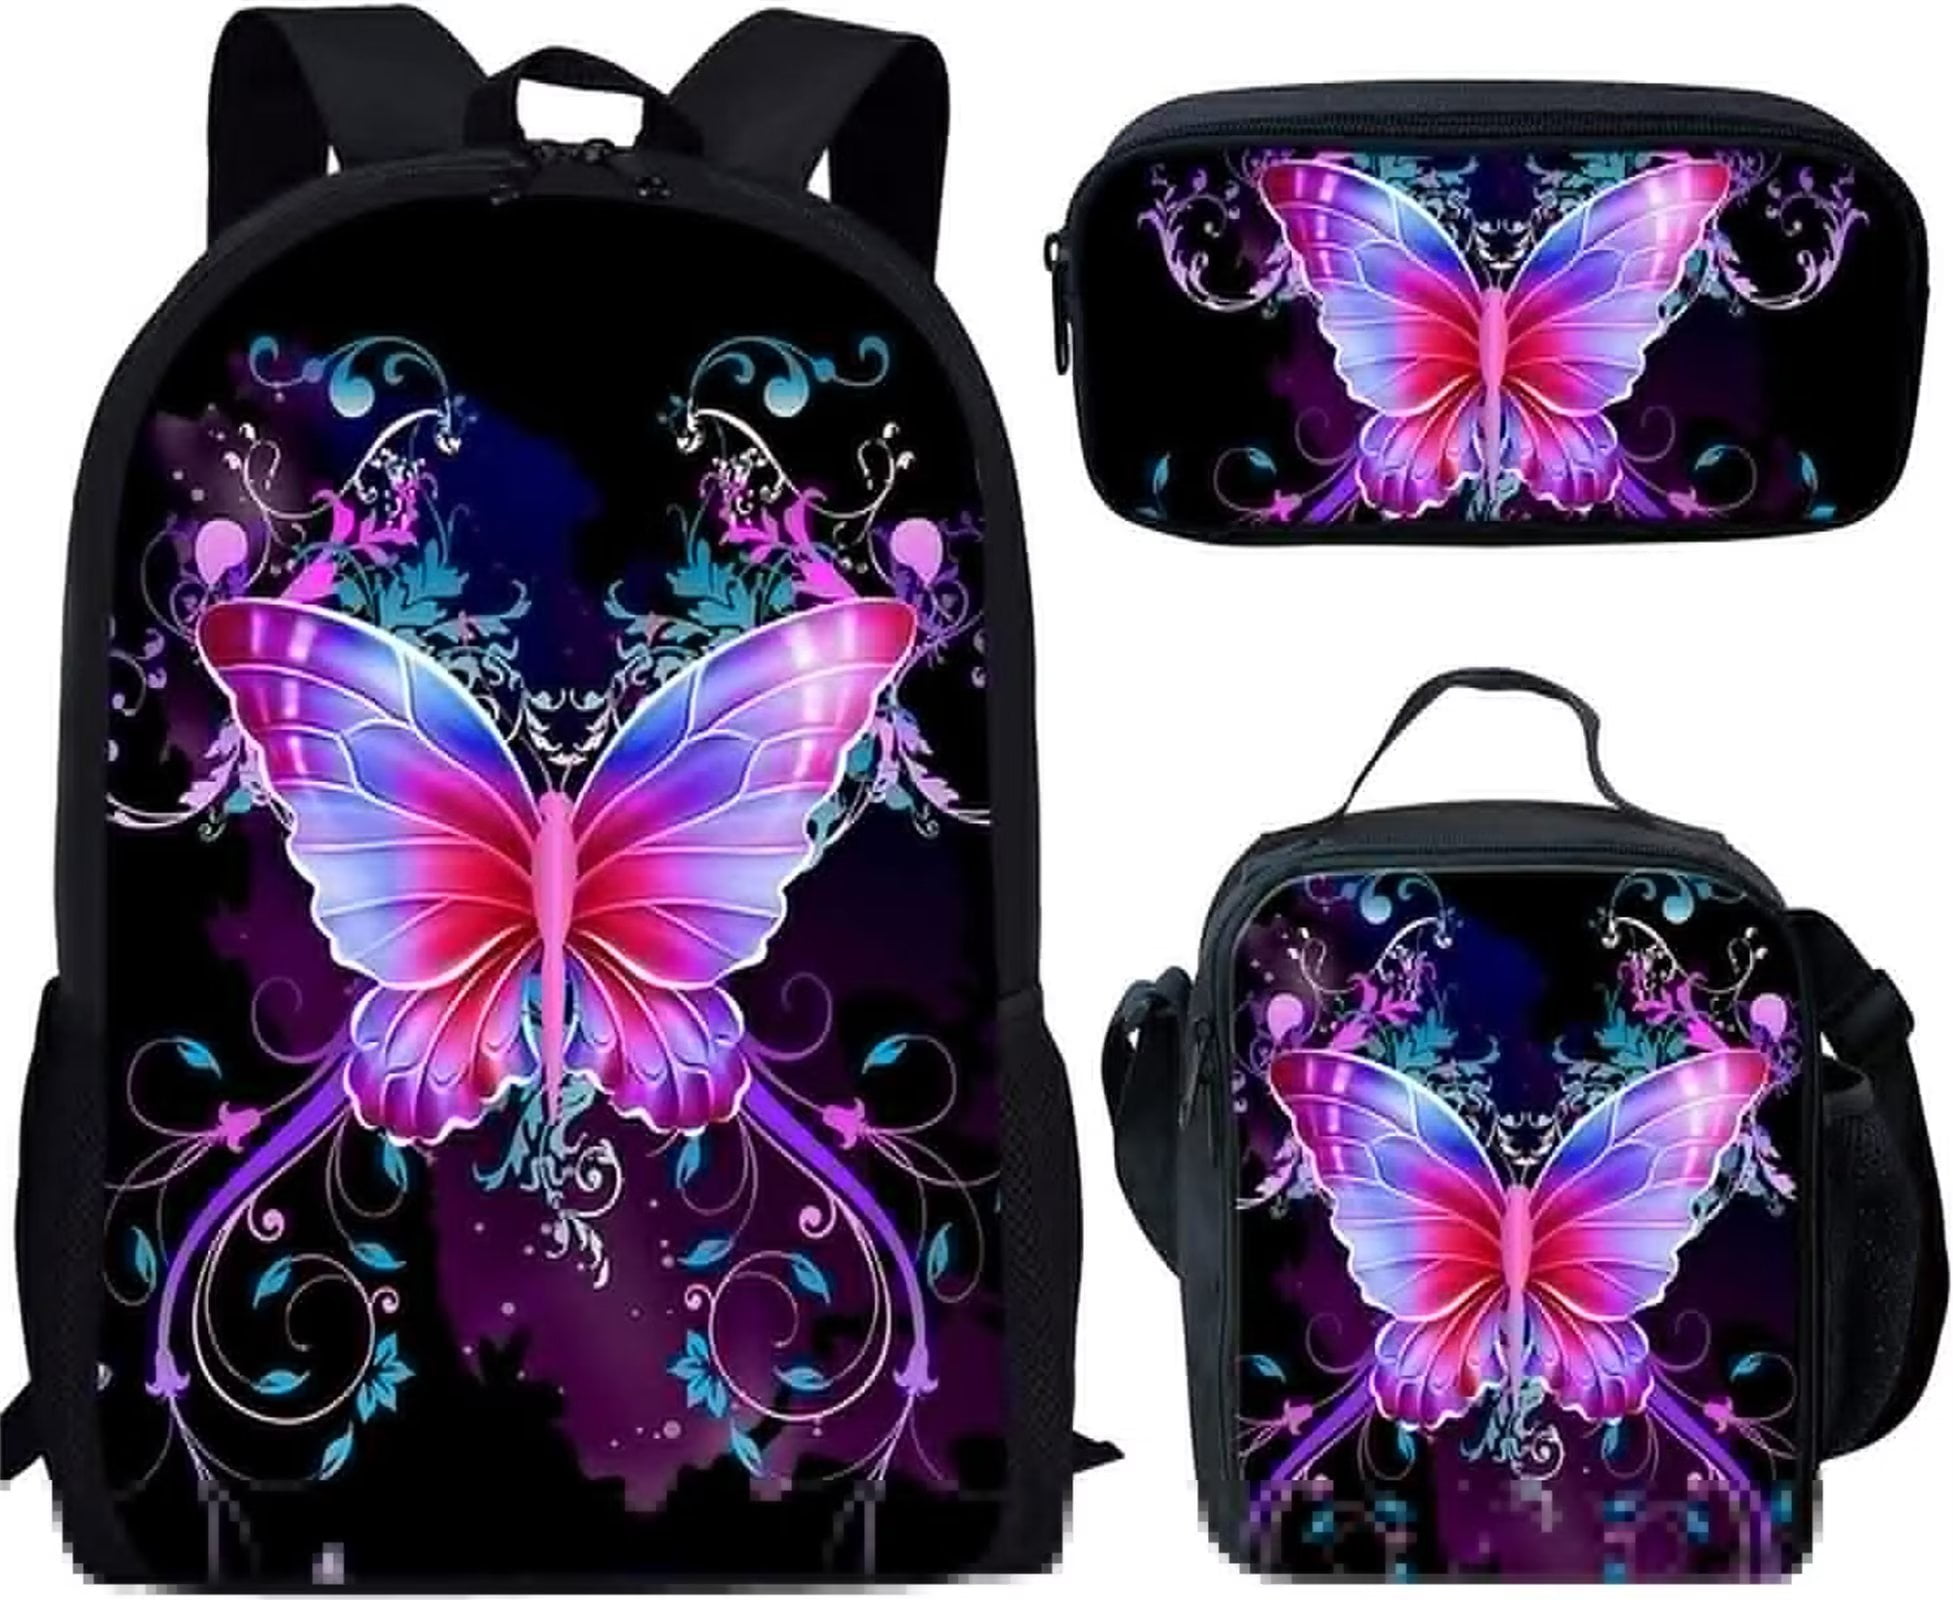 Pink Little Kid 3-Piece Butterfly Backpack, Lunch Box & Snack Cup